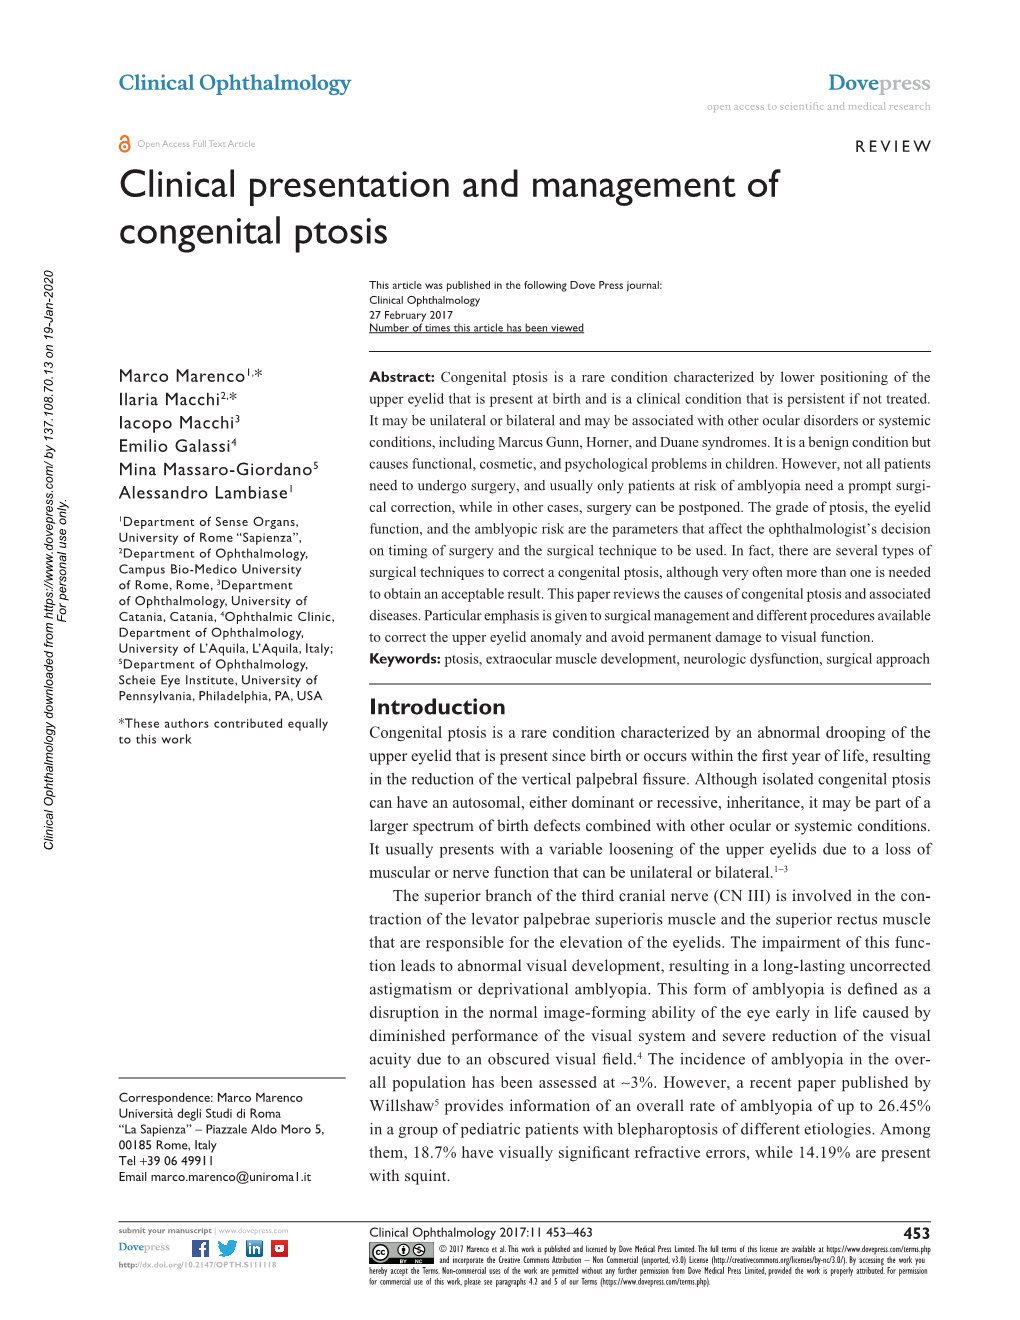 Clinical Presentation and Management of Congenital Ptosis Open Access to Scientific and Medical Research DOI